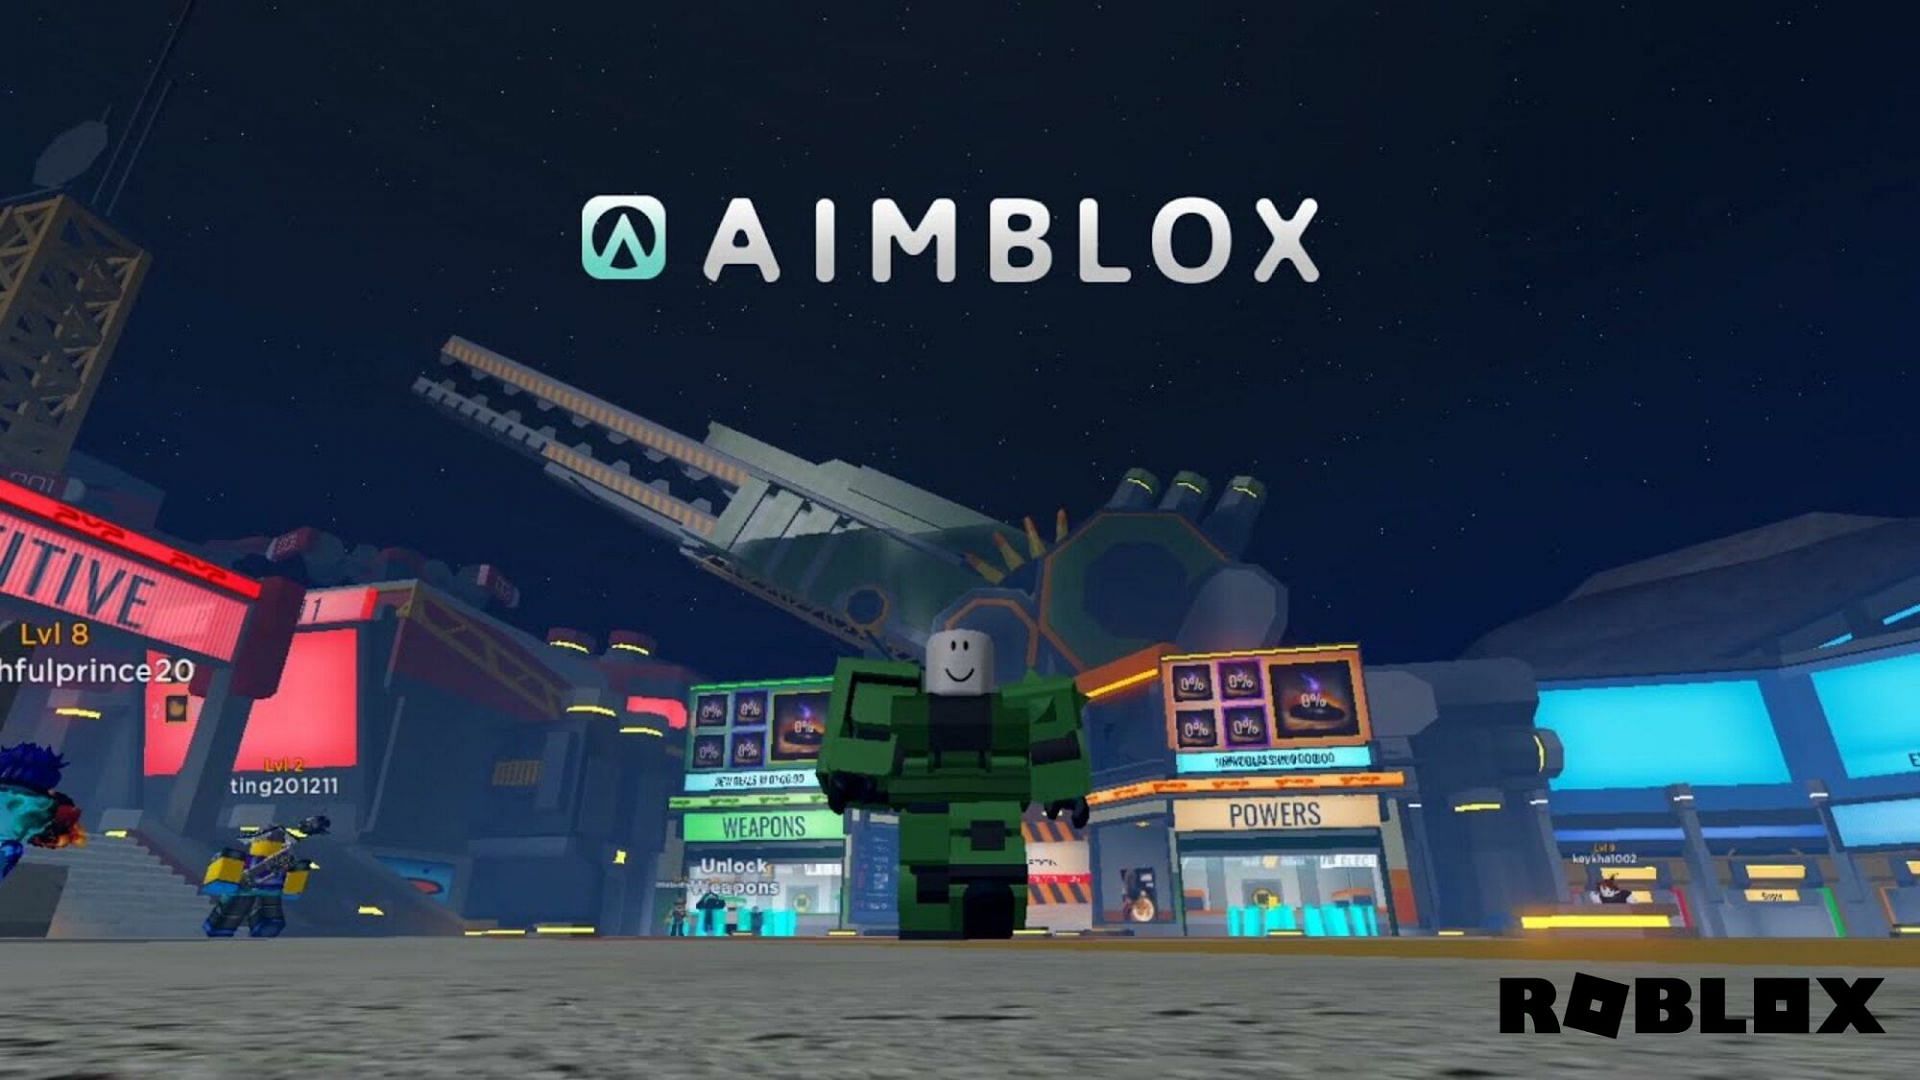 Improve aiming abilities and fight with other players in Roblox Aimblox (Image via Roblox)